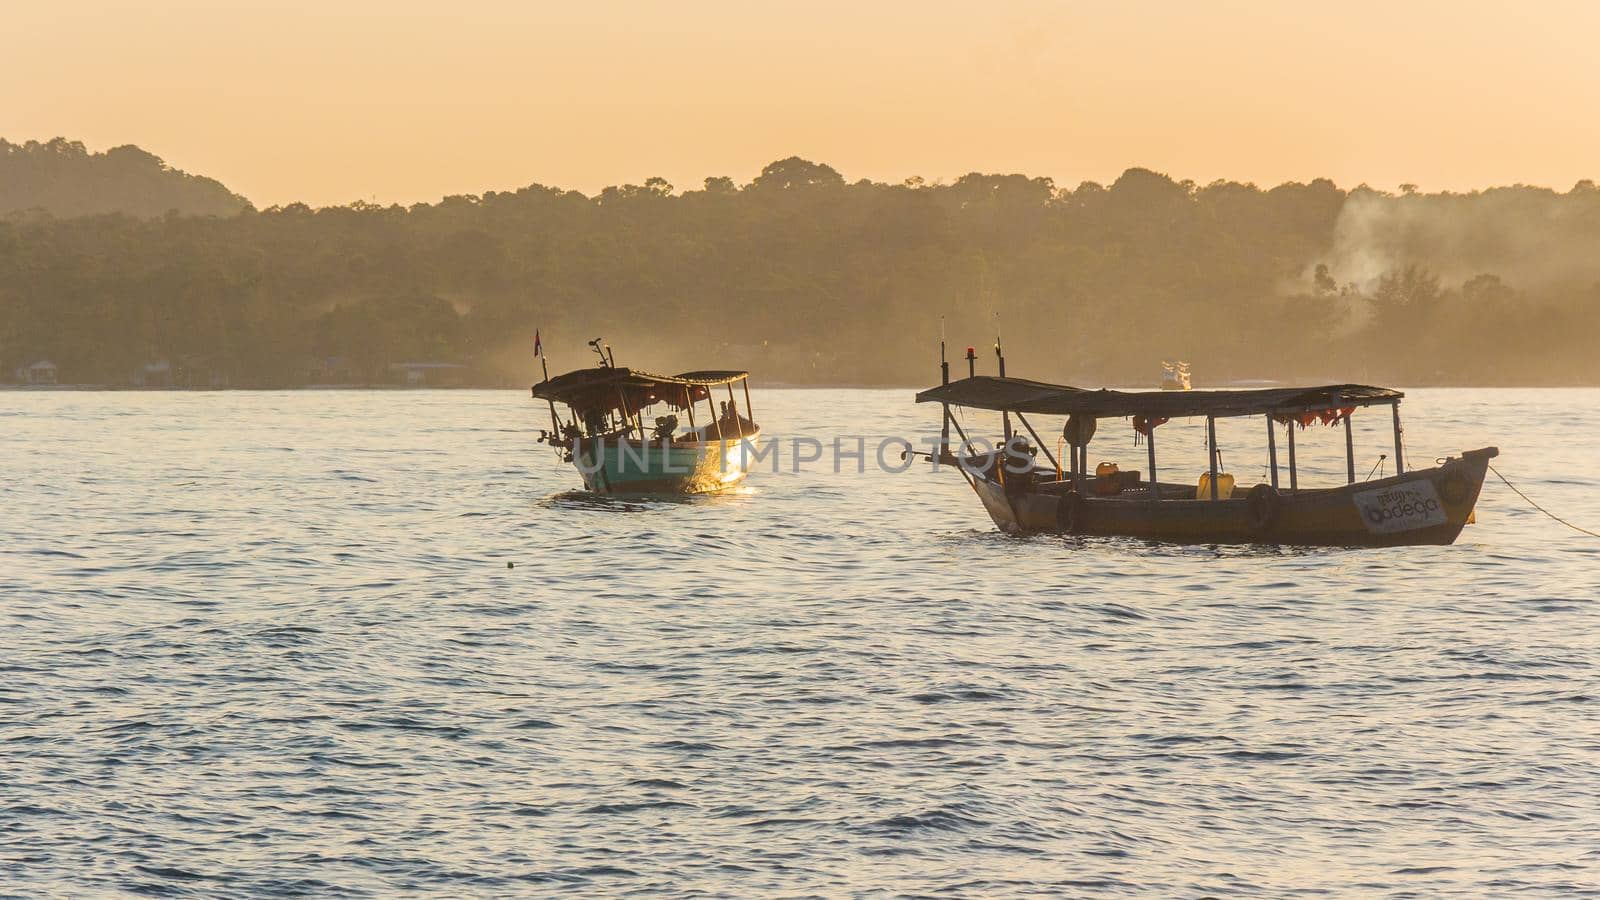 A sunset on Koh Rong island with boats